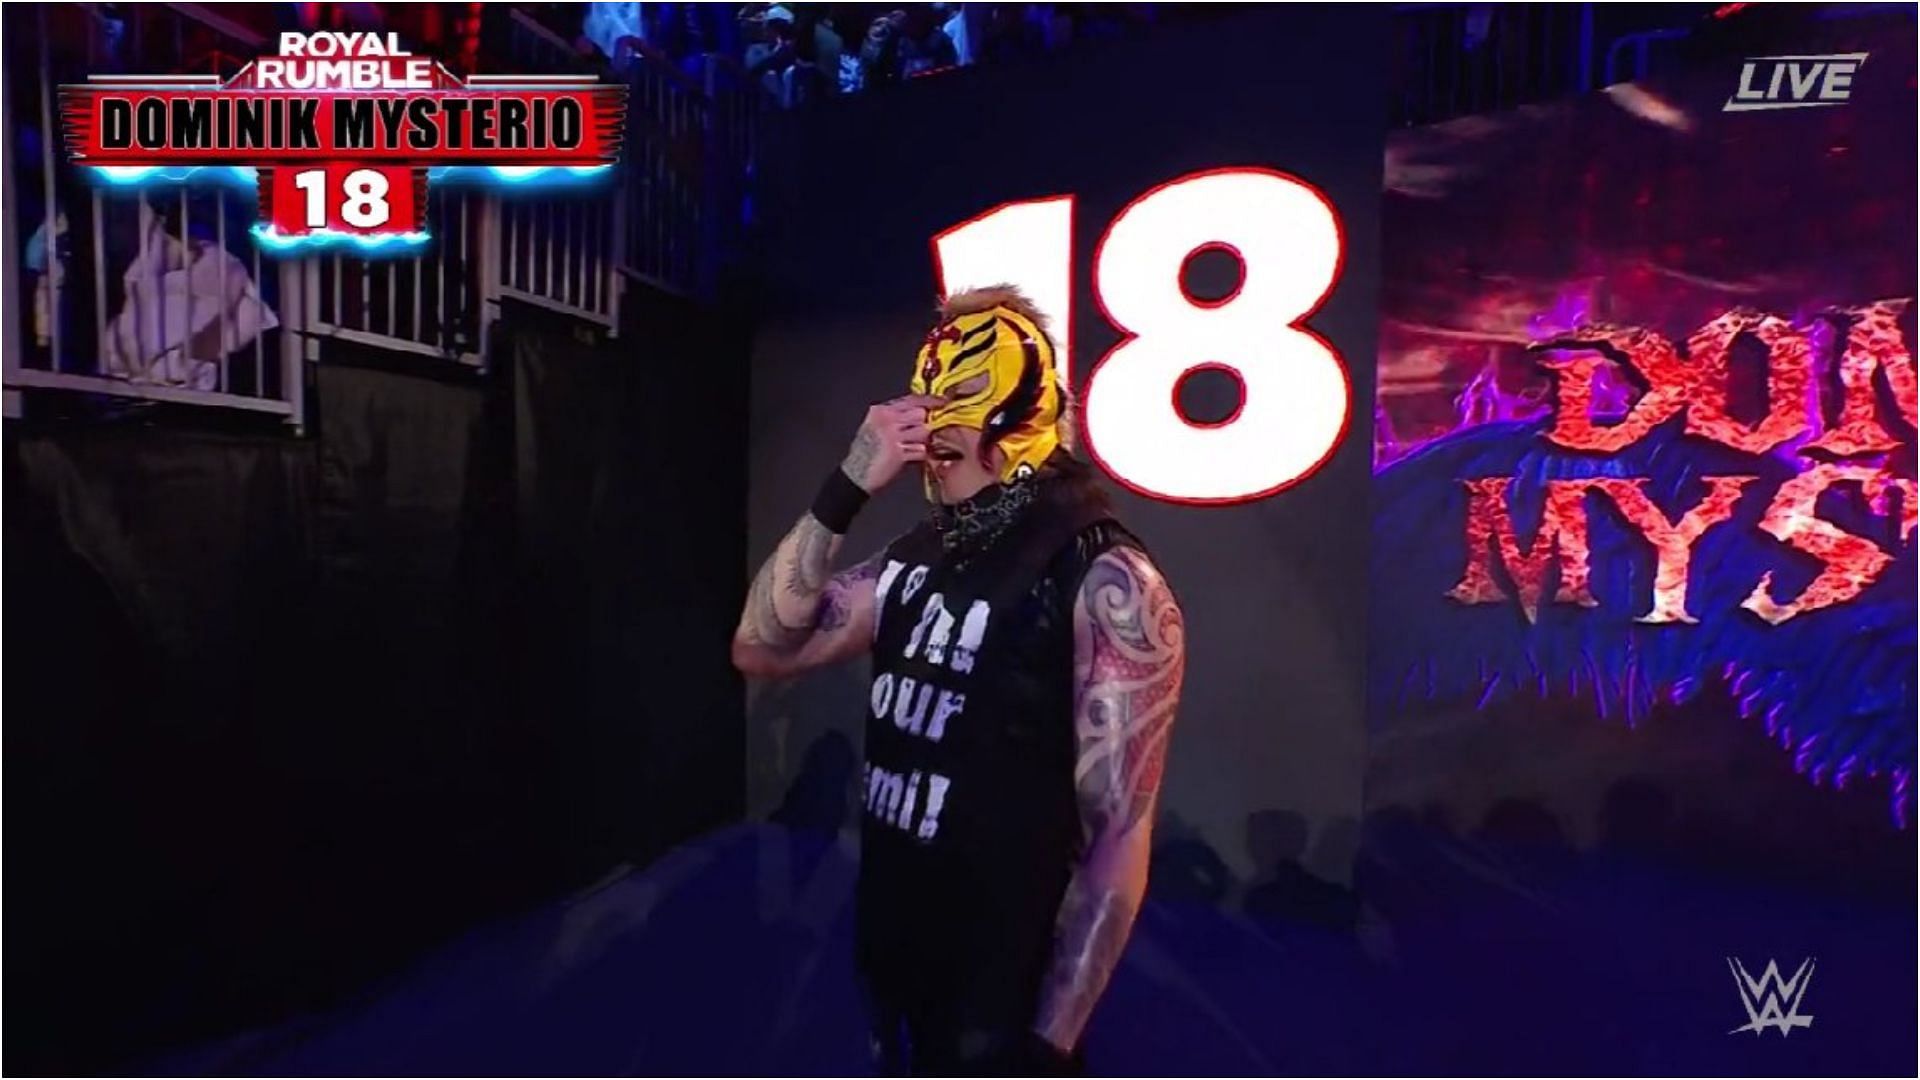 What will it take for Dominik to get Rey Mysterio to fight him?